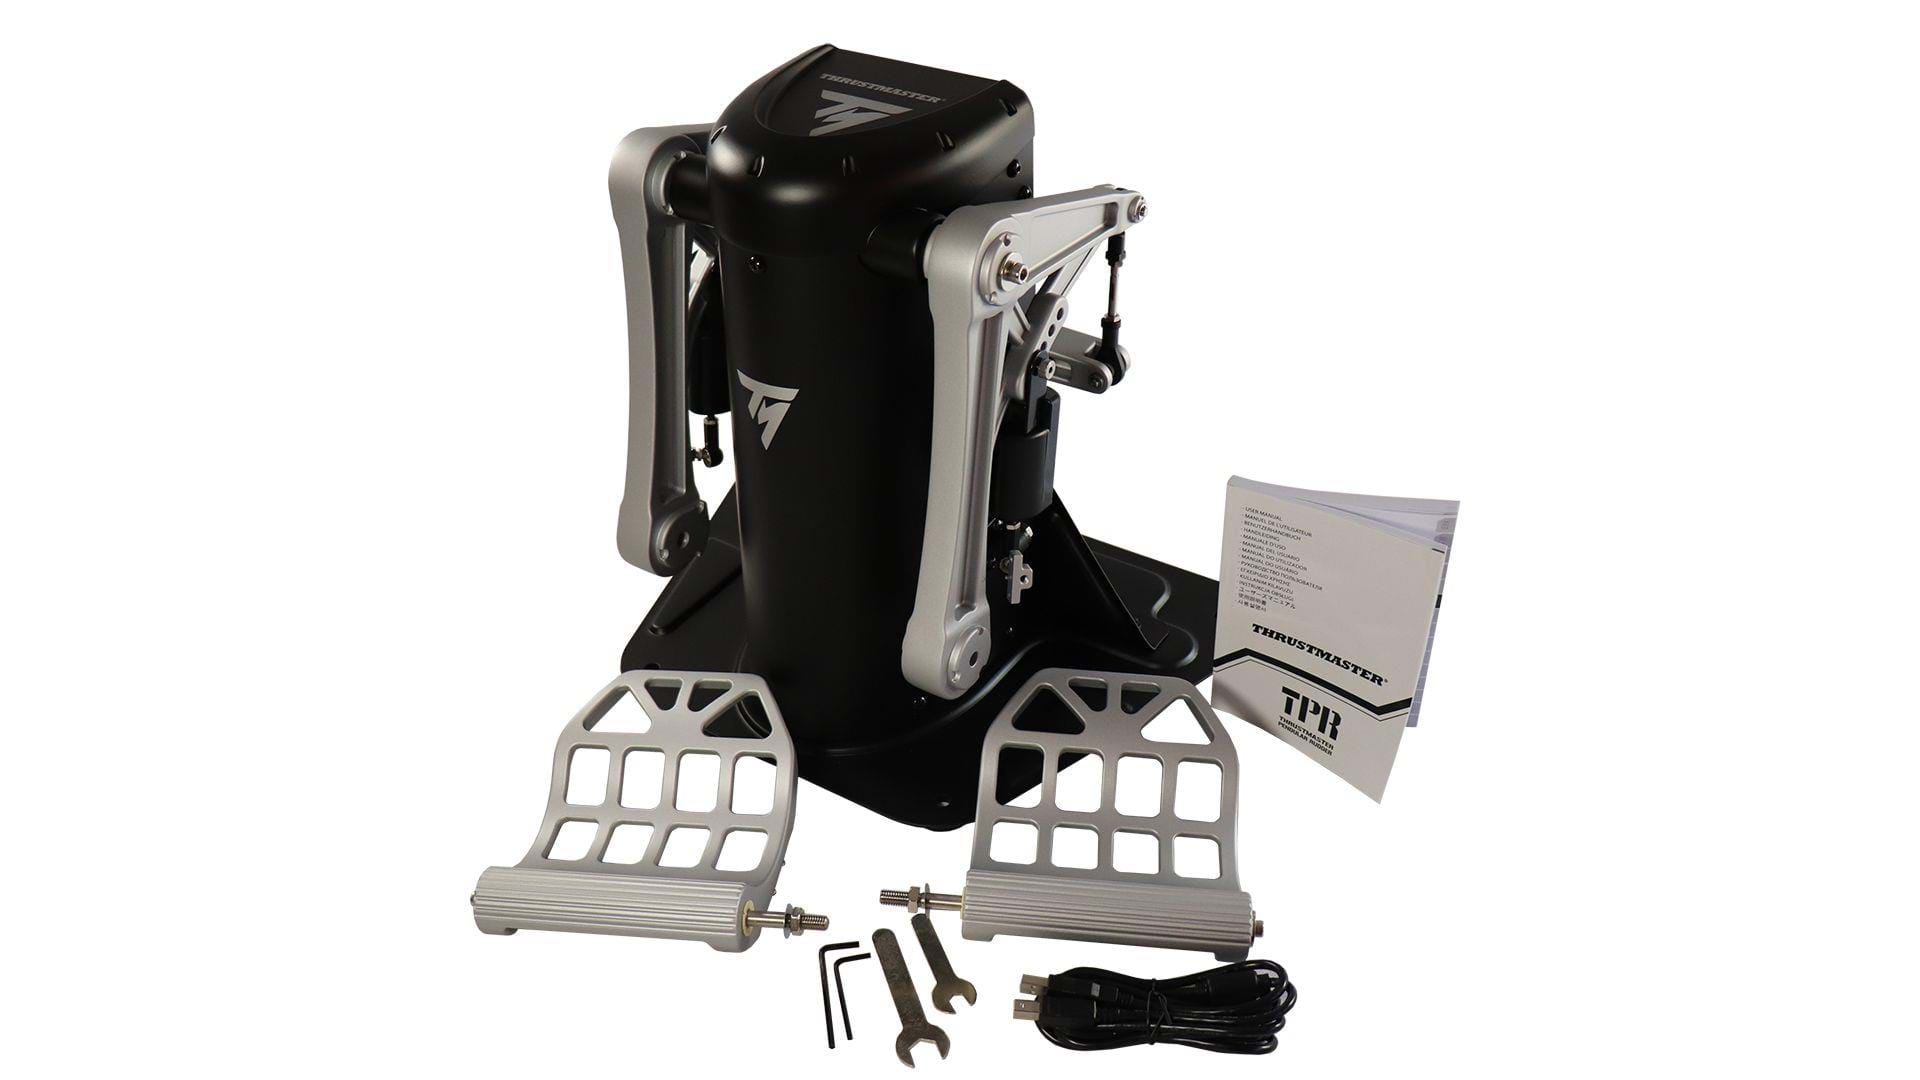 Thrustmaster TPR pedals - parts